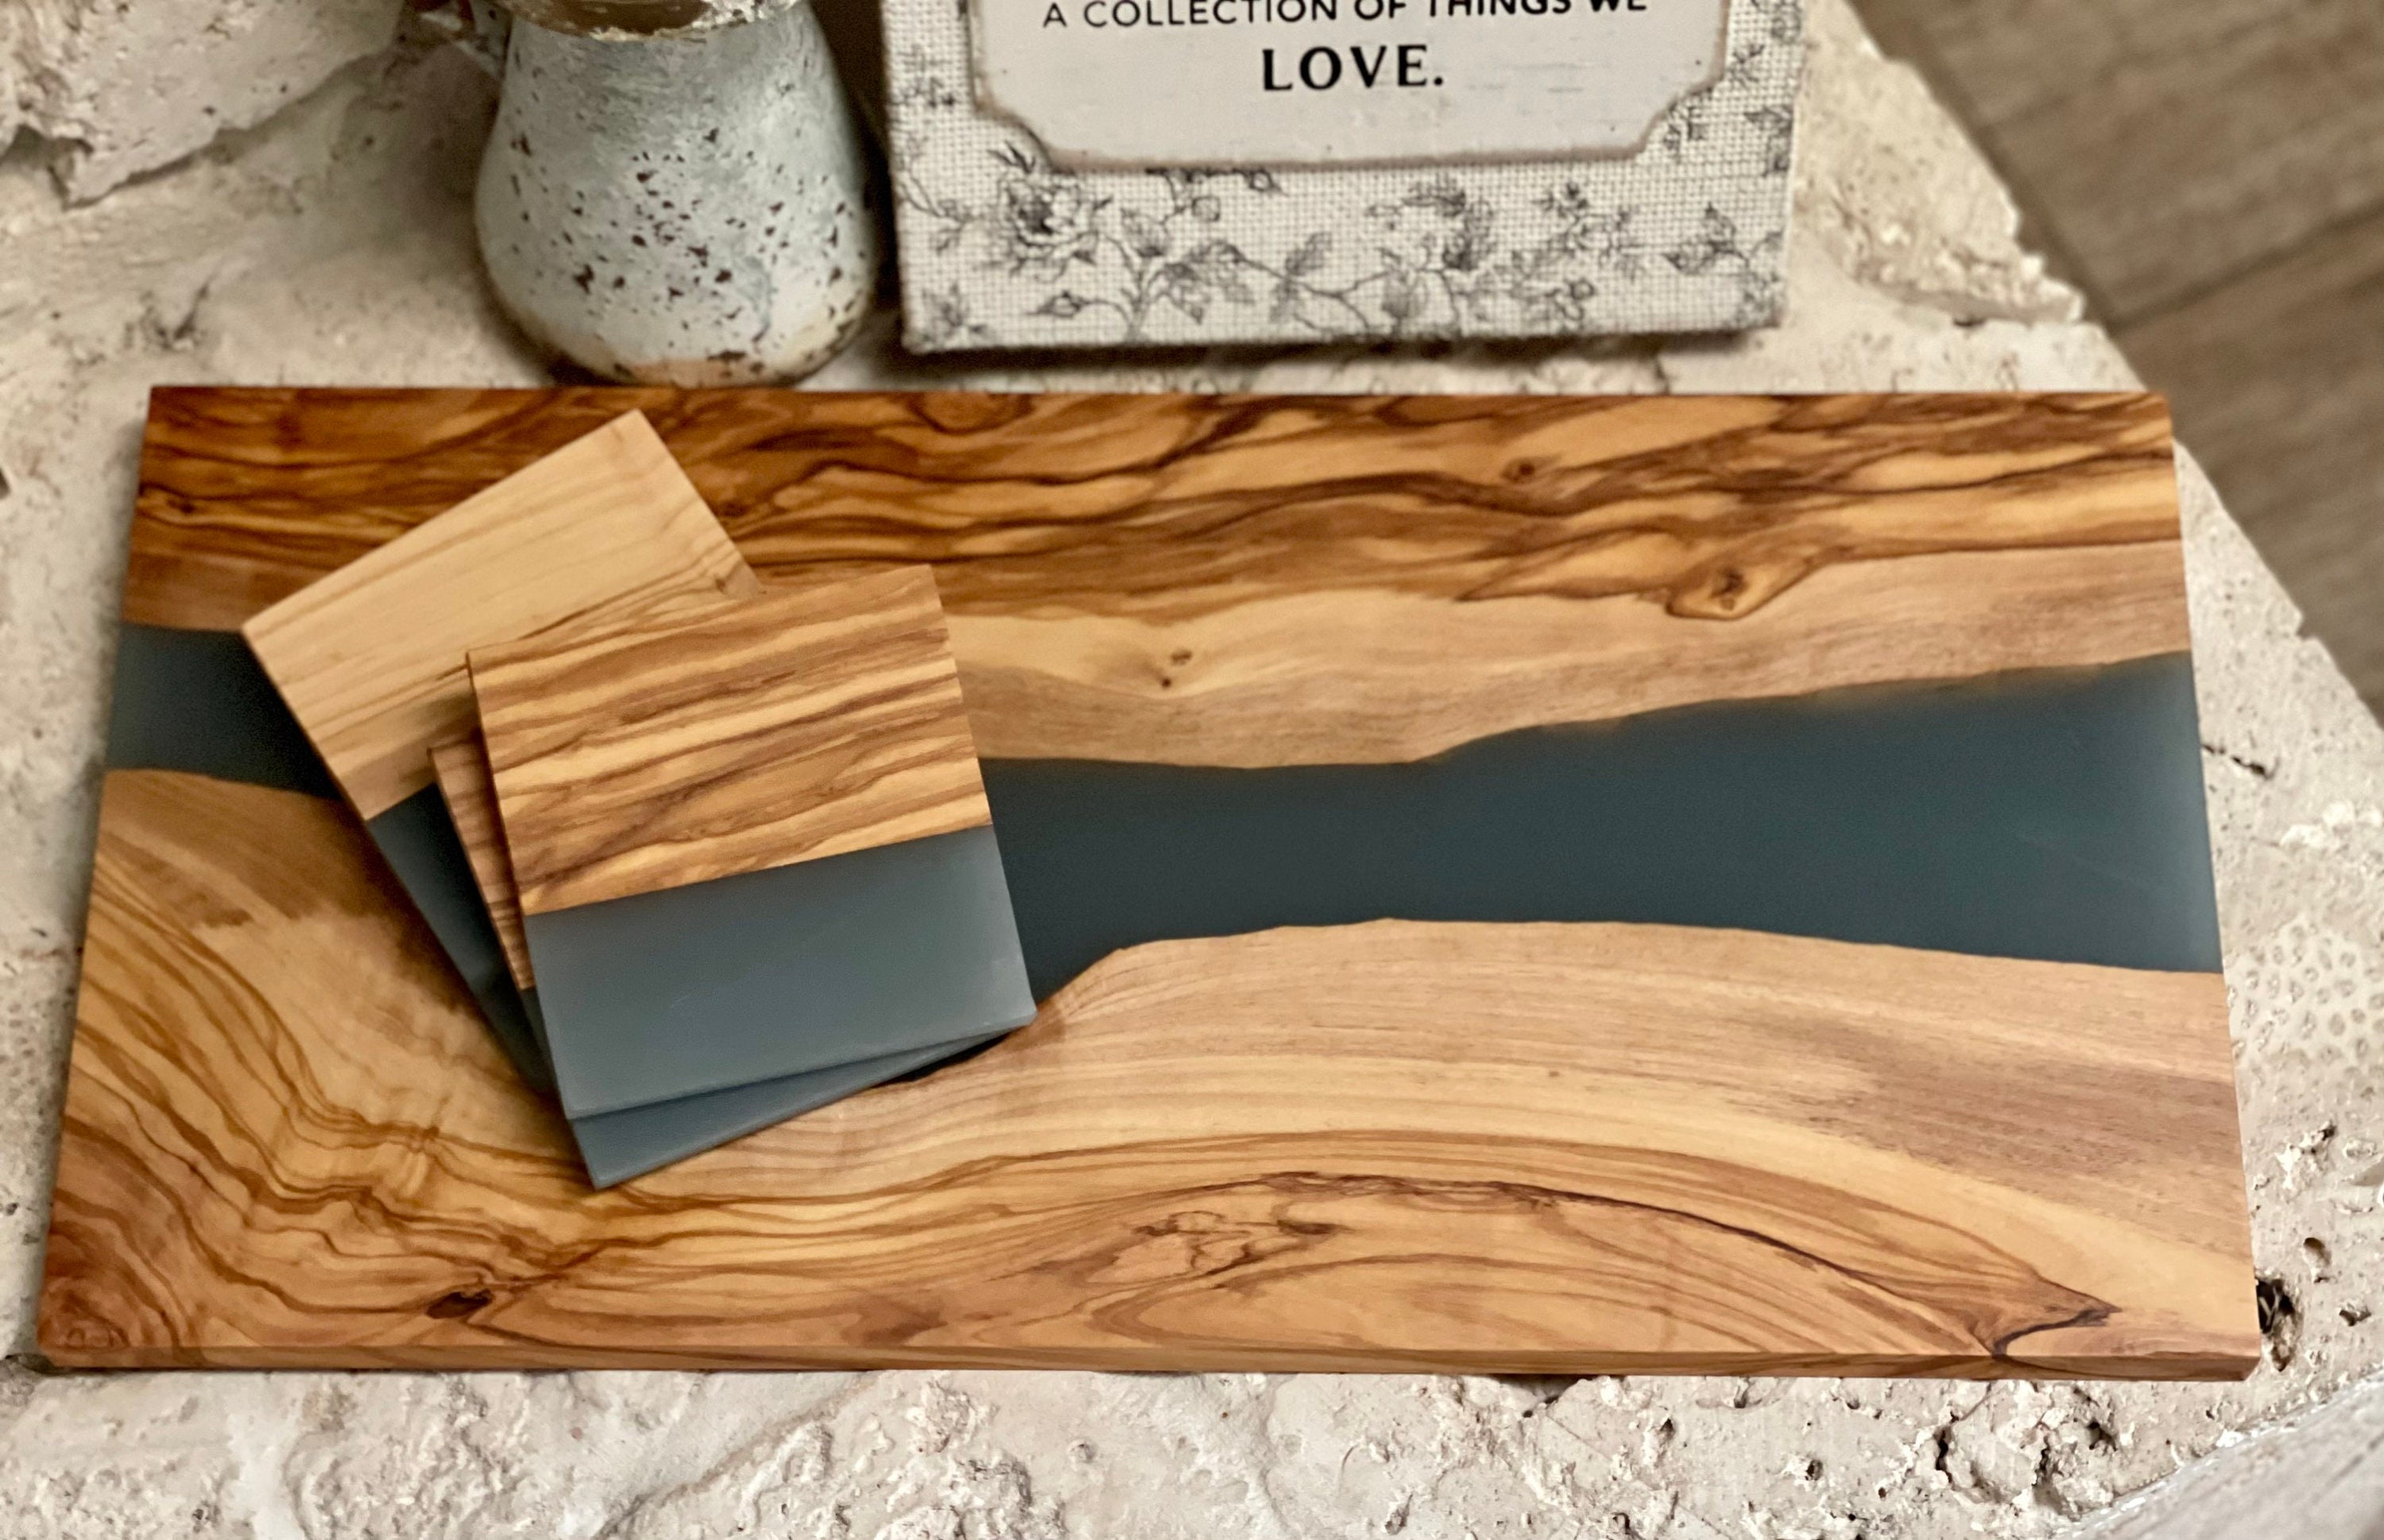 Large Resin Charcuterie Board with Olive Wood | Serves 4-6 People